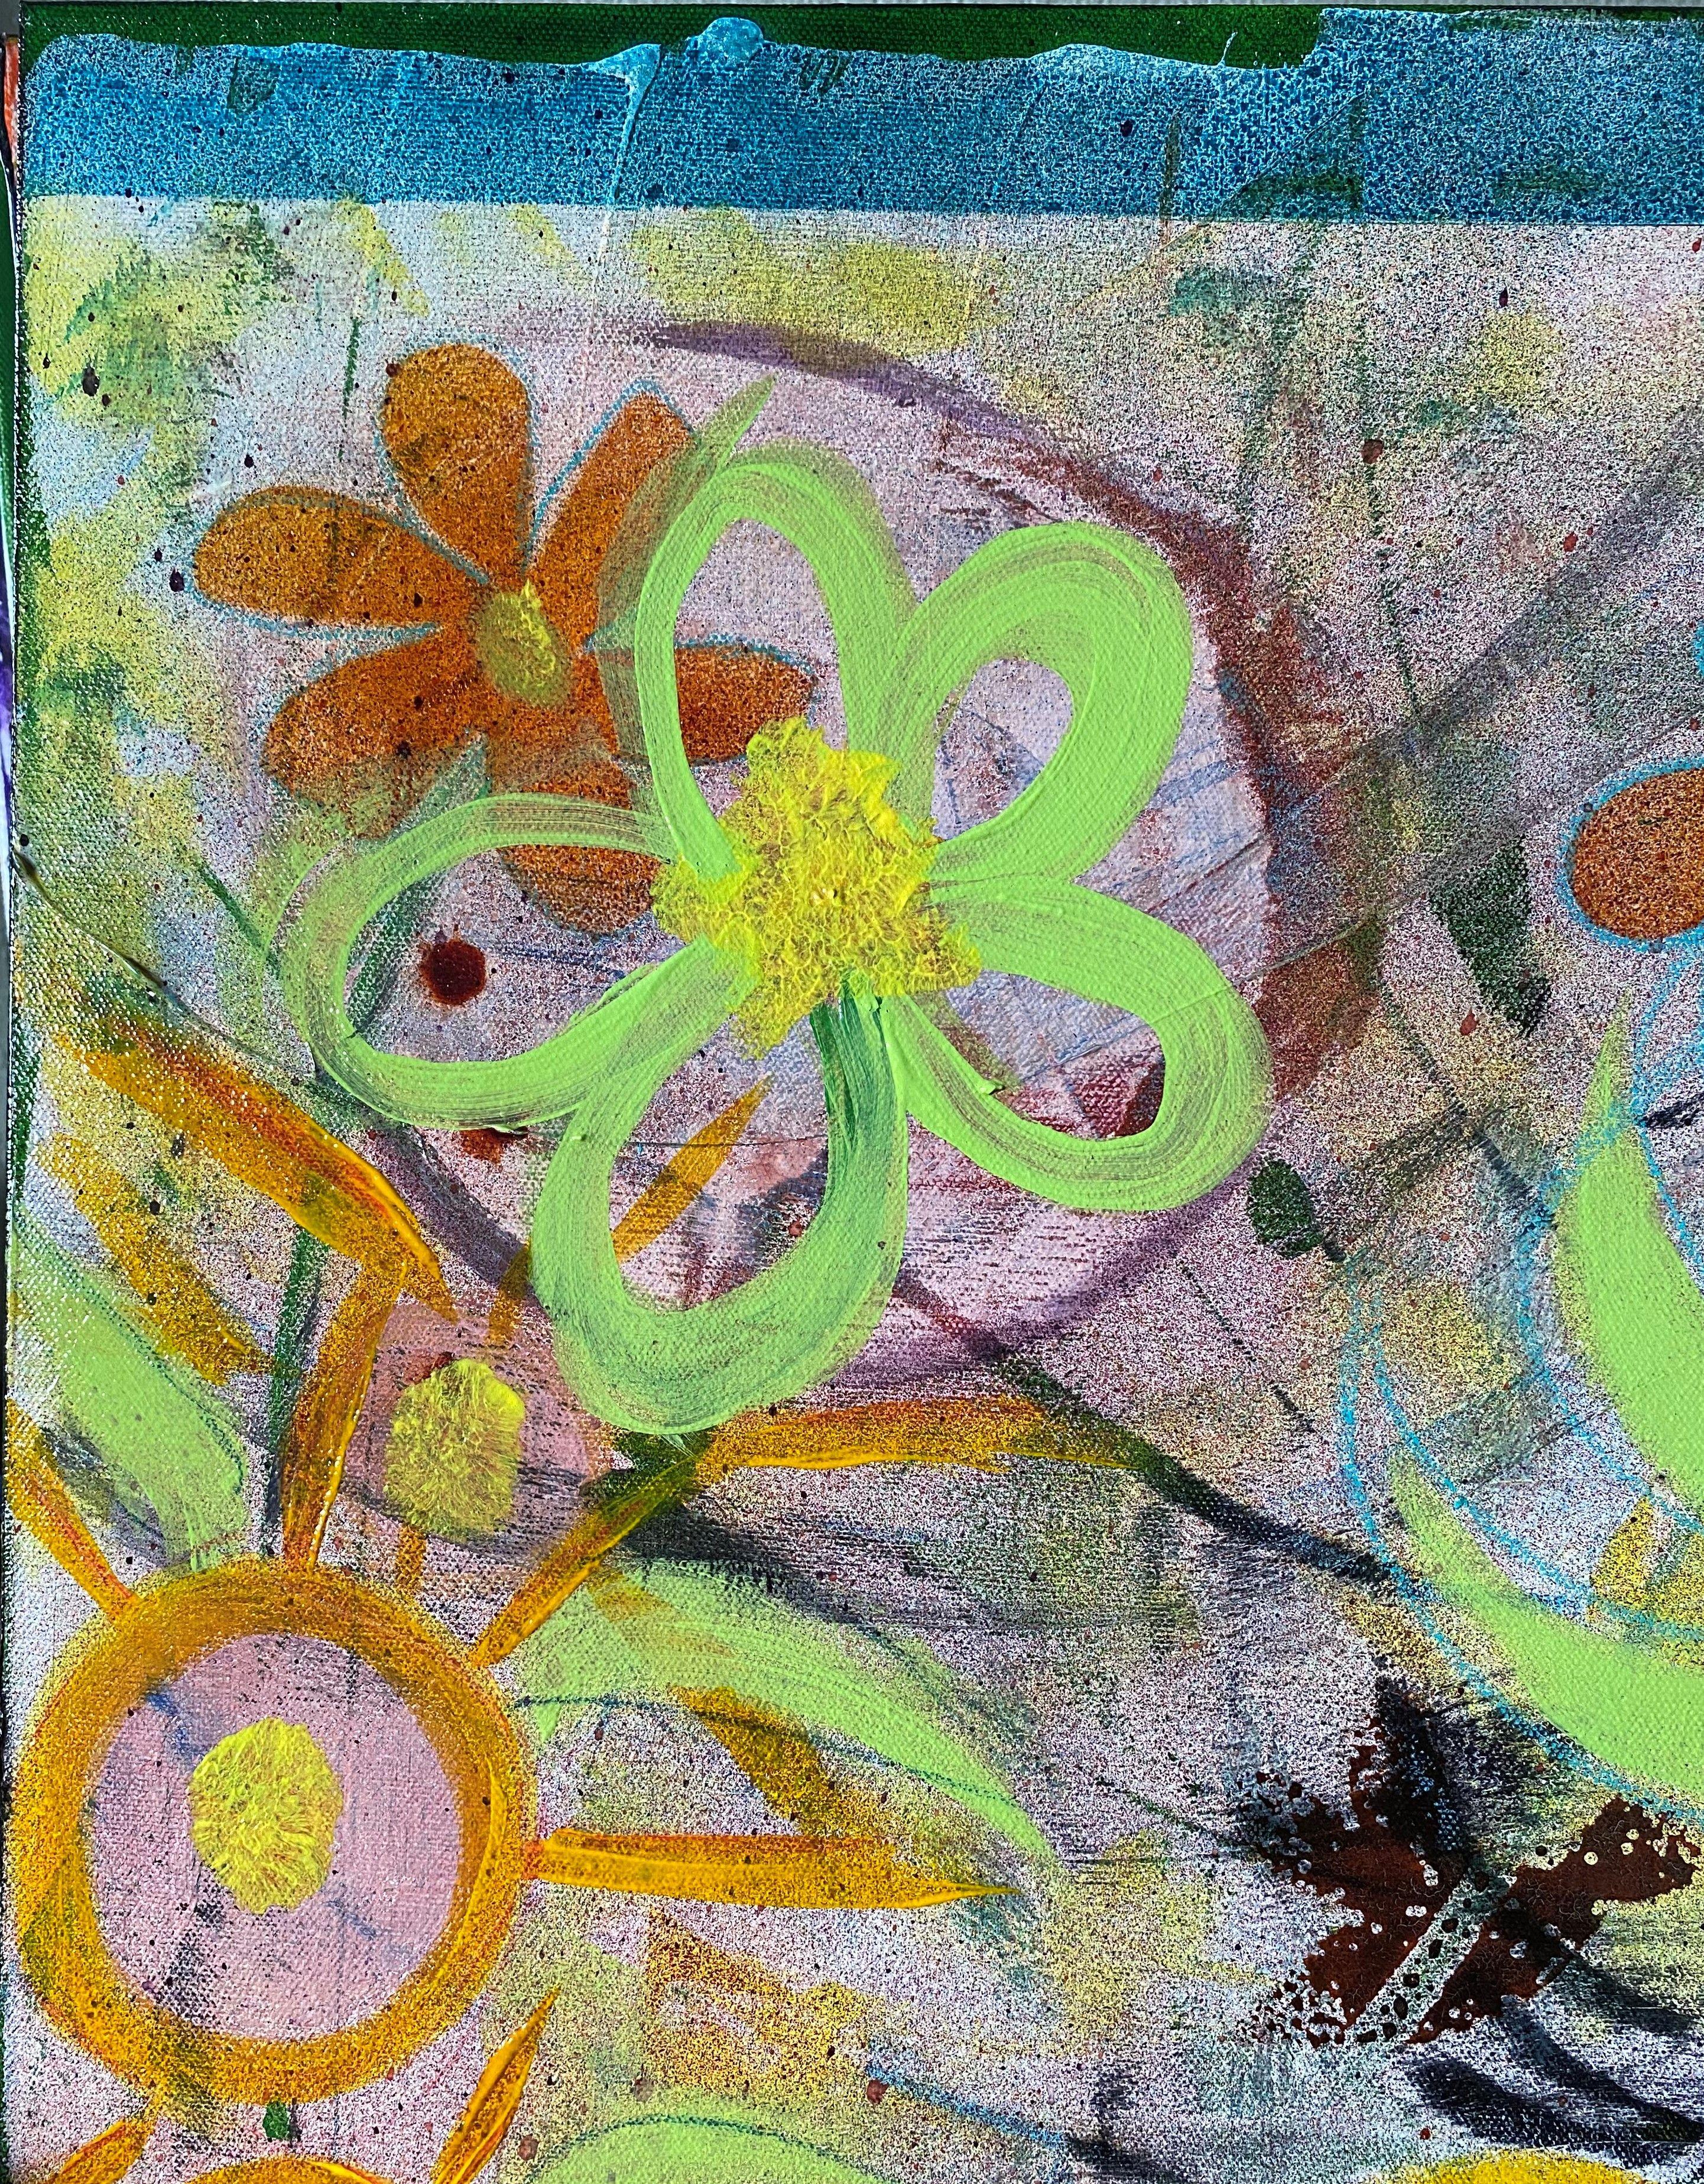 Late spring inspired this work of flowers & bees. I hope the viewer can feel what it might be like in this flower garden. This is my vision of an abstract perception of a garden of flowers. :: Painting :: Contemporary :: This piece comes with an